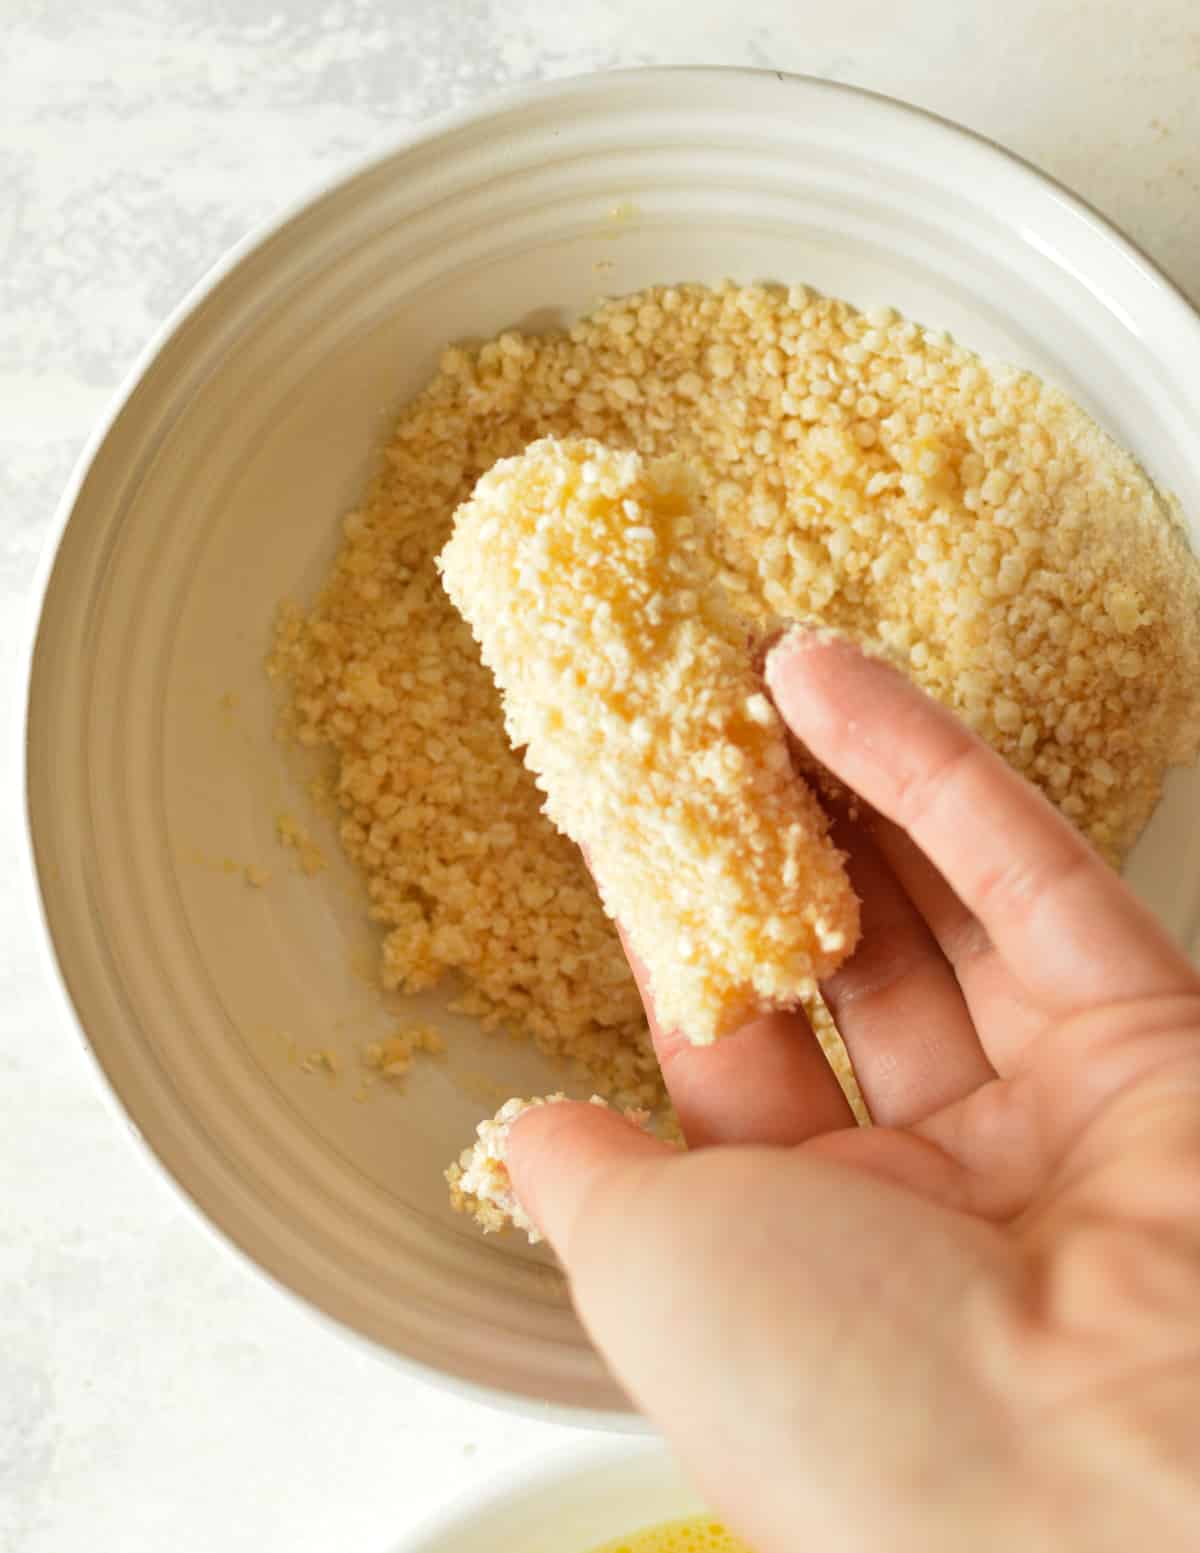 hand holding a cheese stick coated in gluten free breadcrumbs